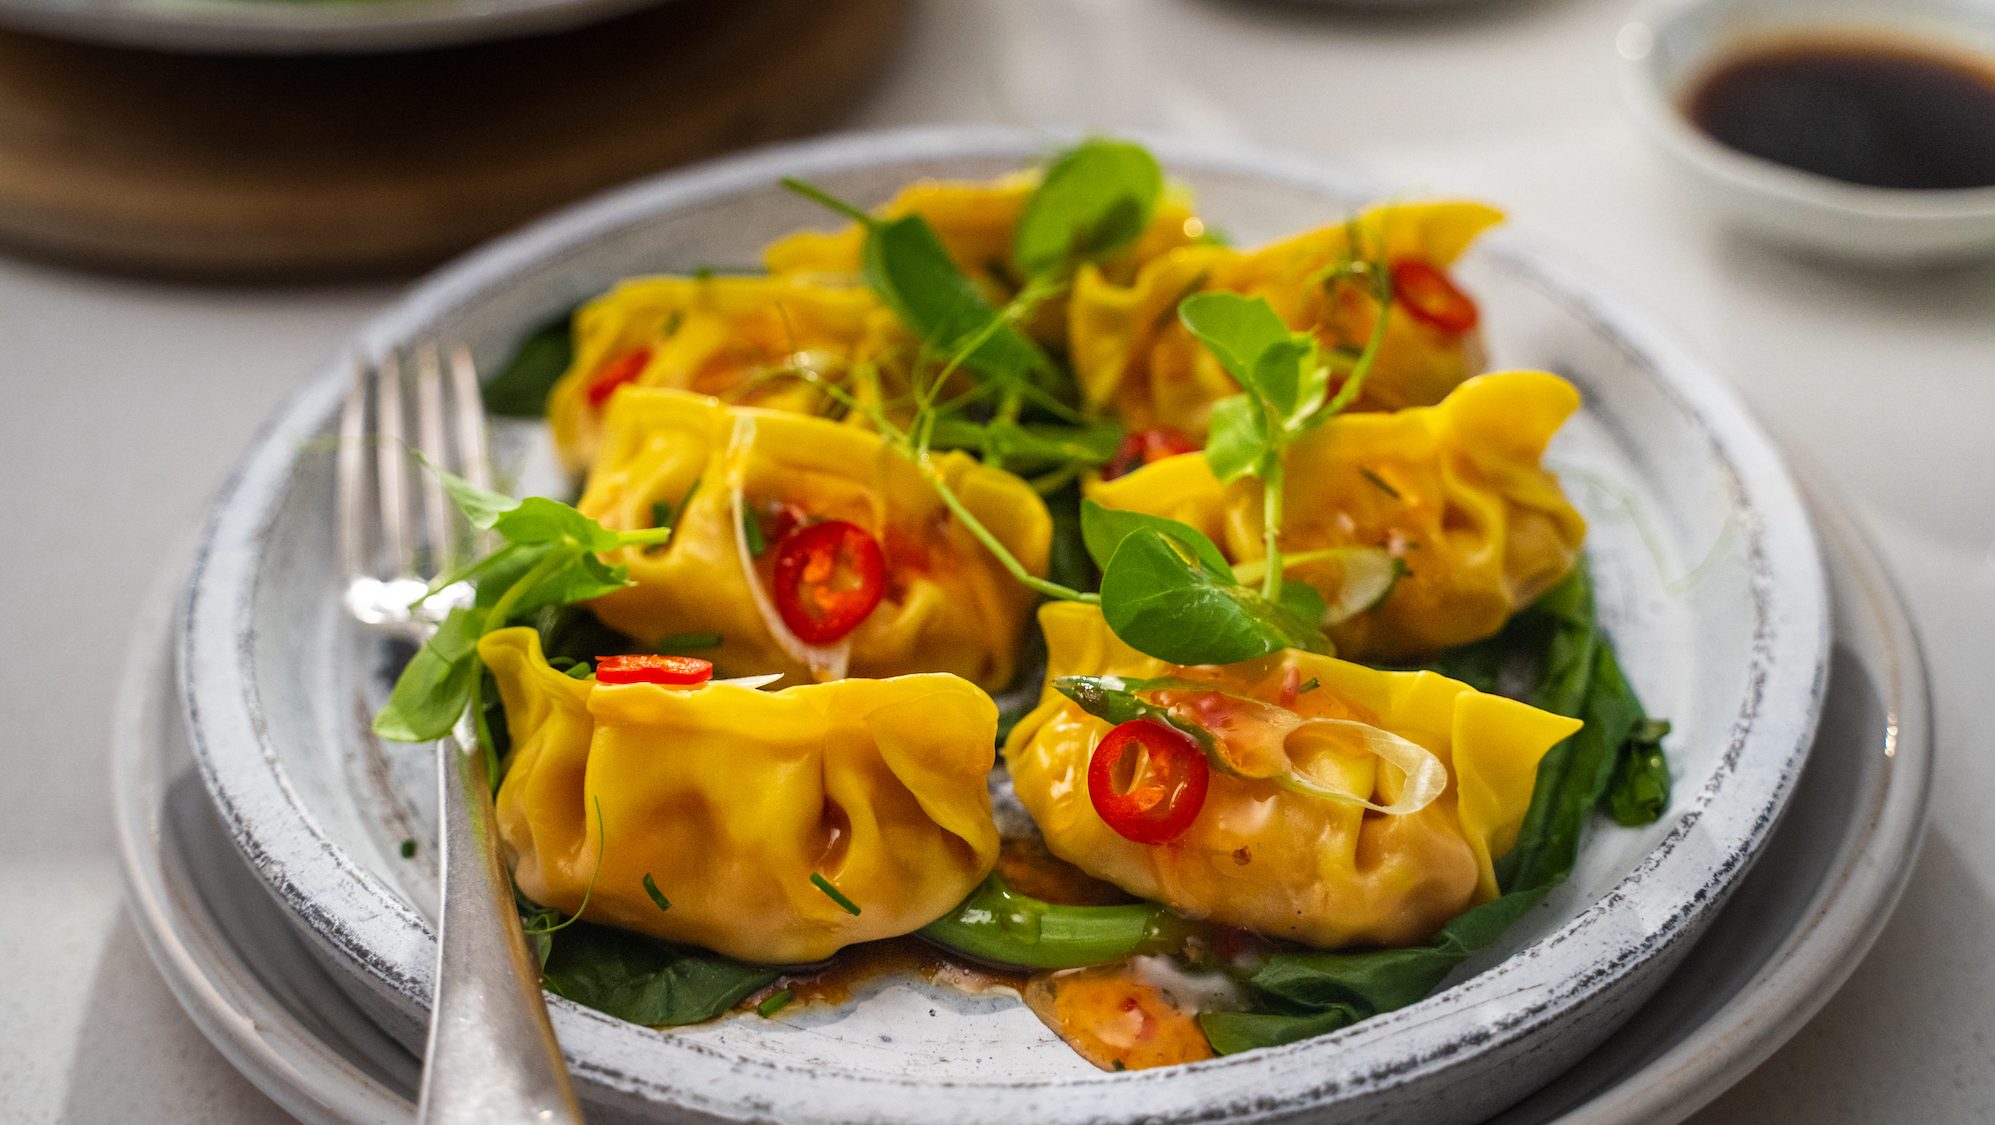 Dim sum - Steamed ginger prawn dumplings on a plate garnished with red chilli slices and fresh herbs